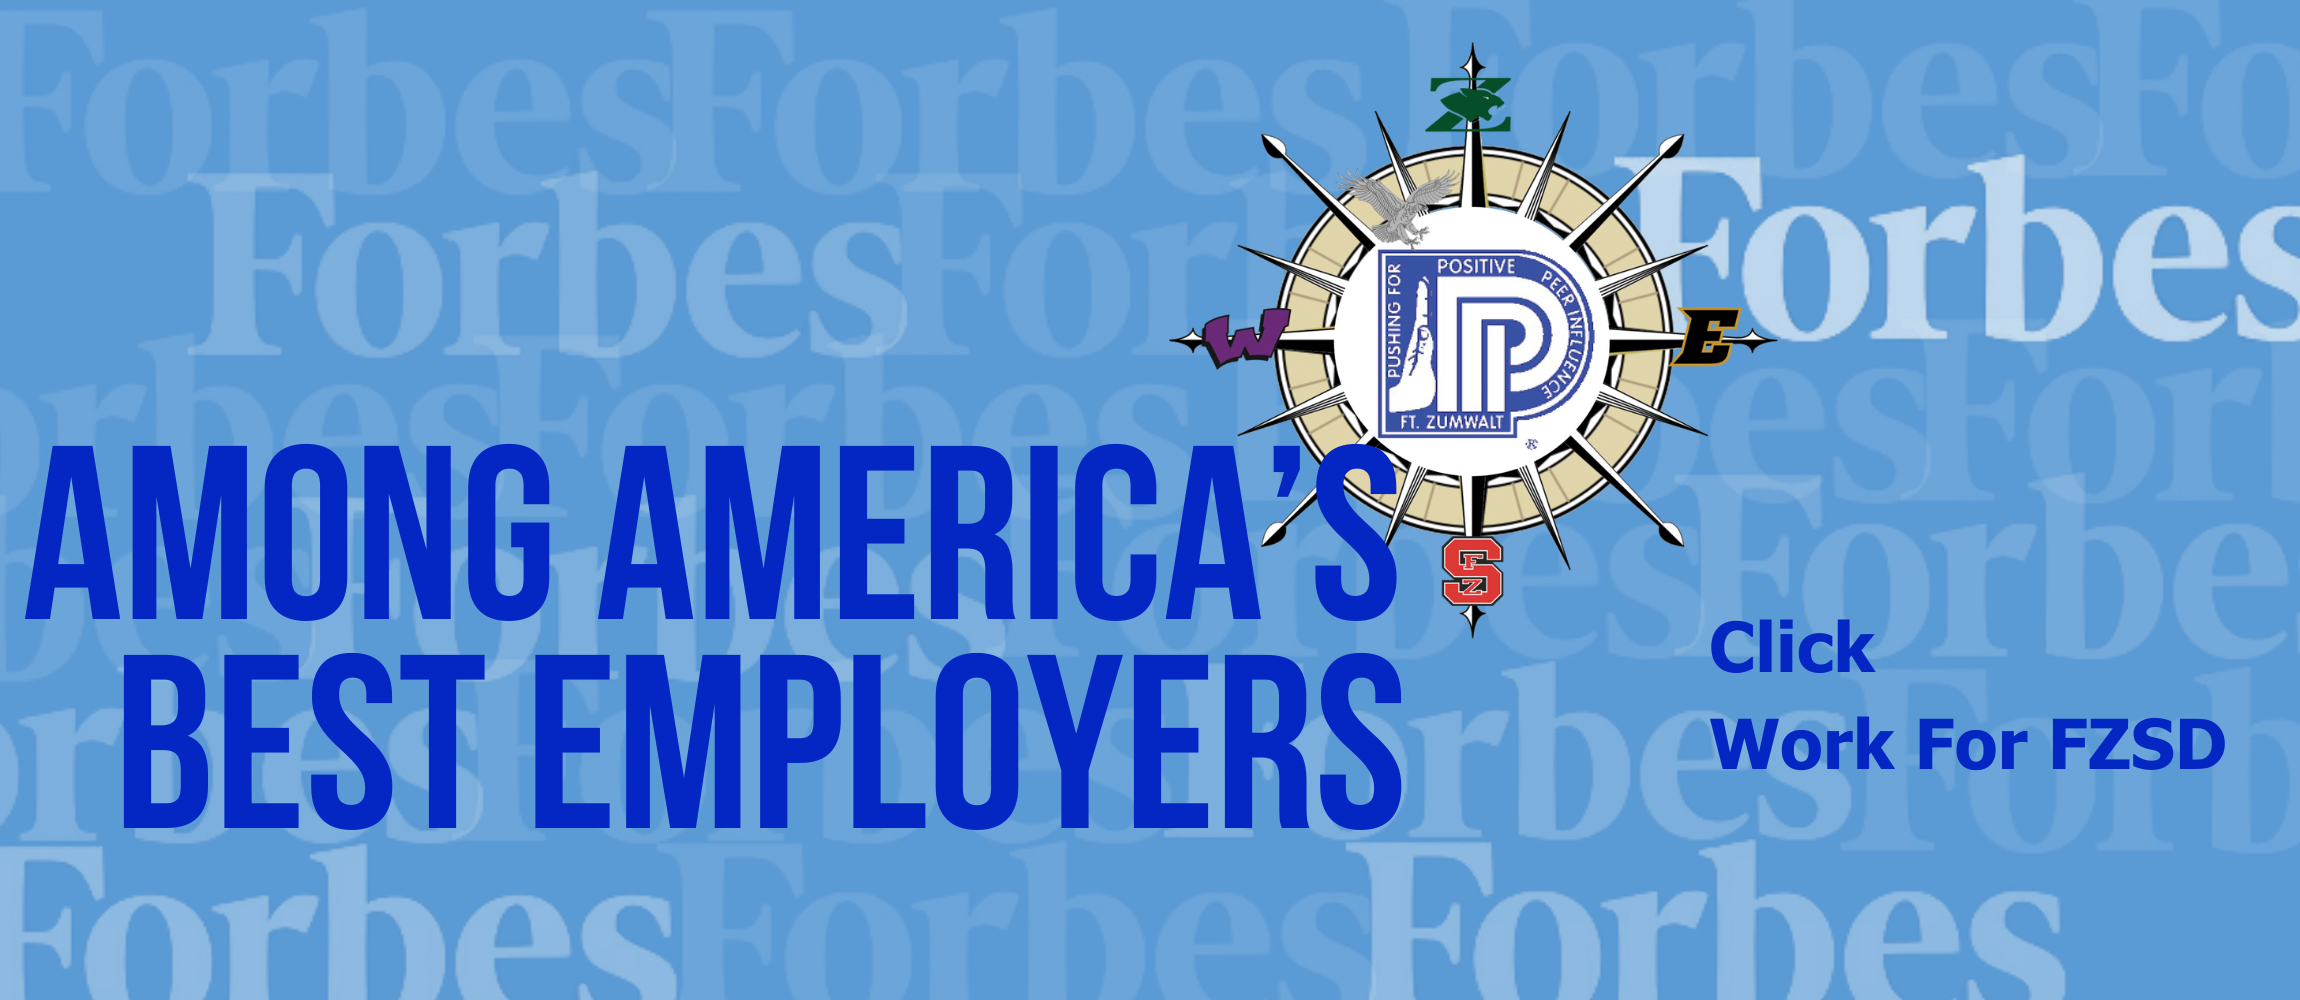 FZSD Among America's Best Employers according to Forbes Click Work for FZSD